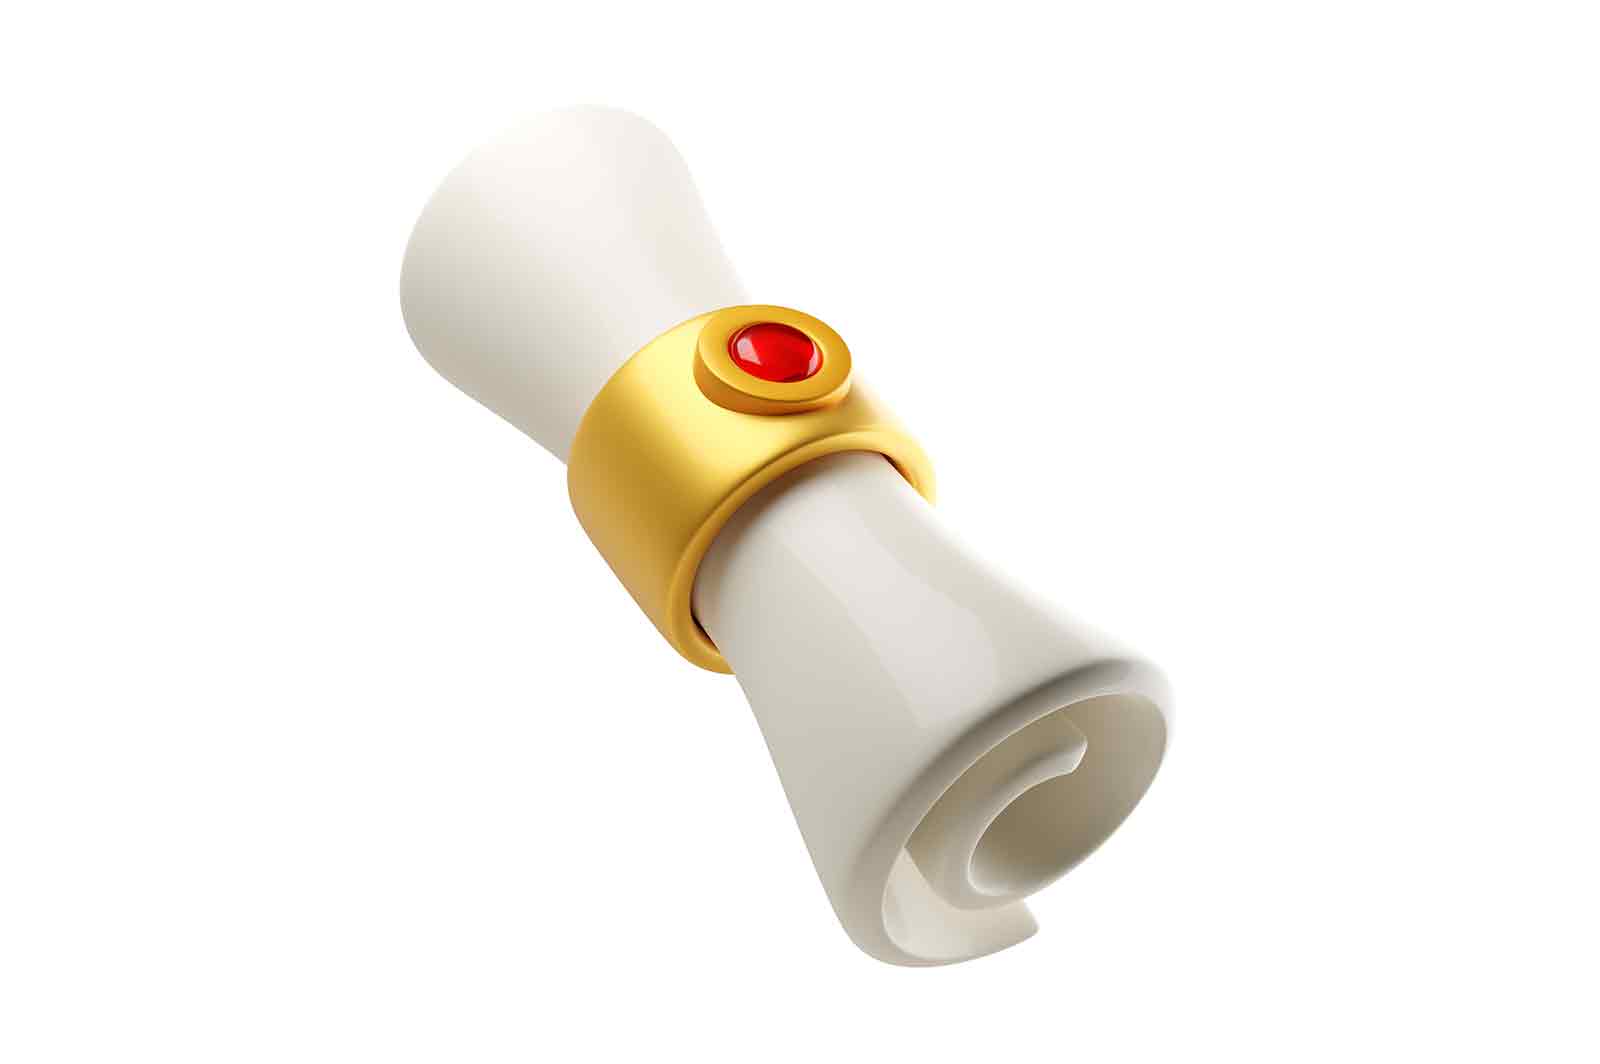 Scroll or manuscript with gold band and gemstone, 3d rendered illustration. Symbol of history, literature, or mystery.